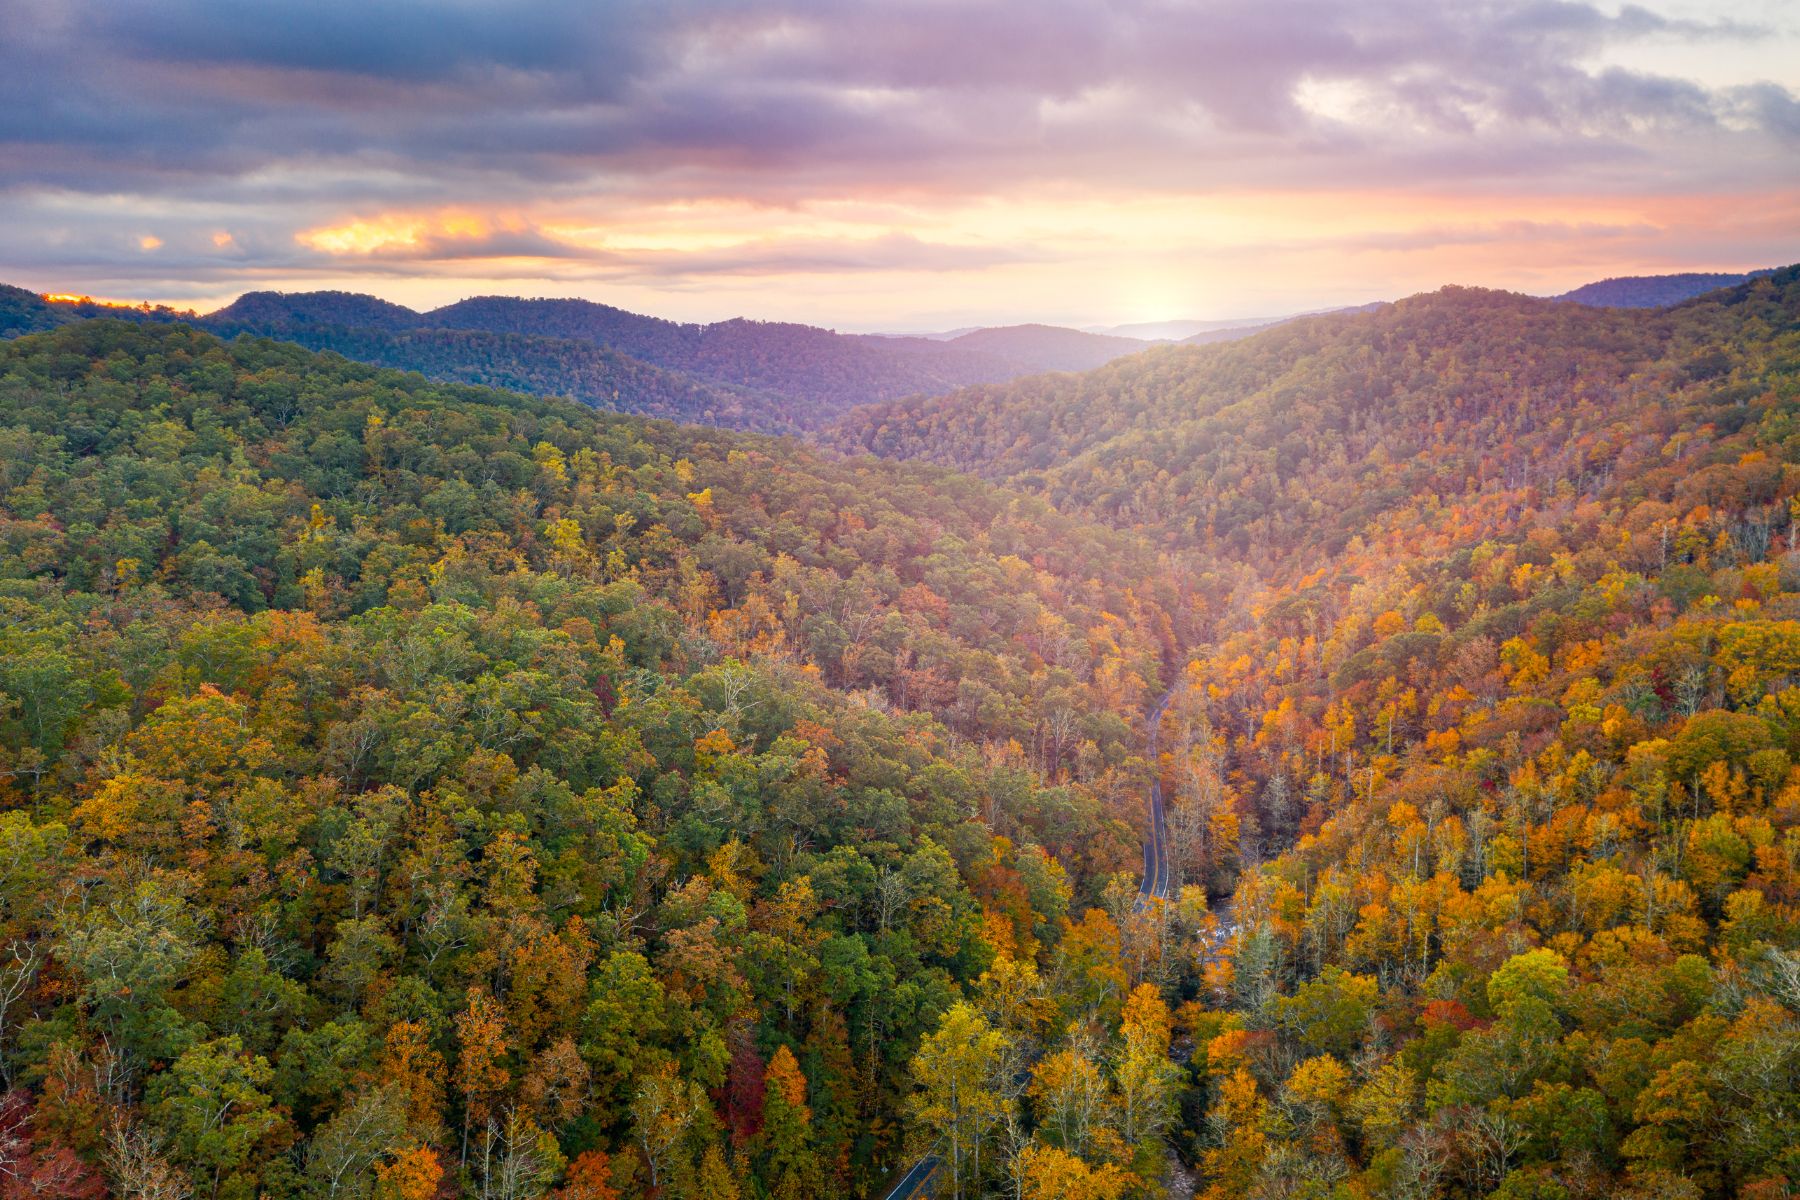 When is the Best Time to Visit Pisgah National Forest?